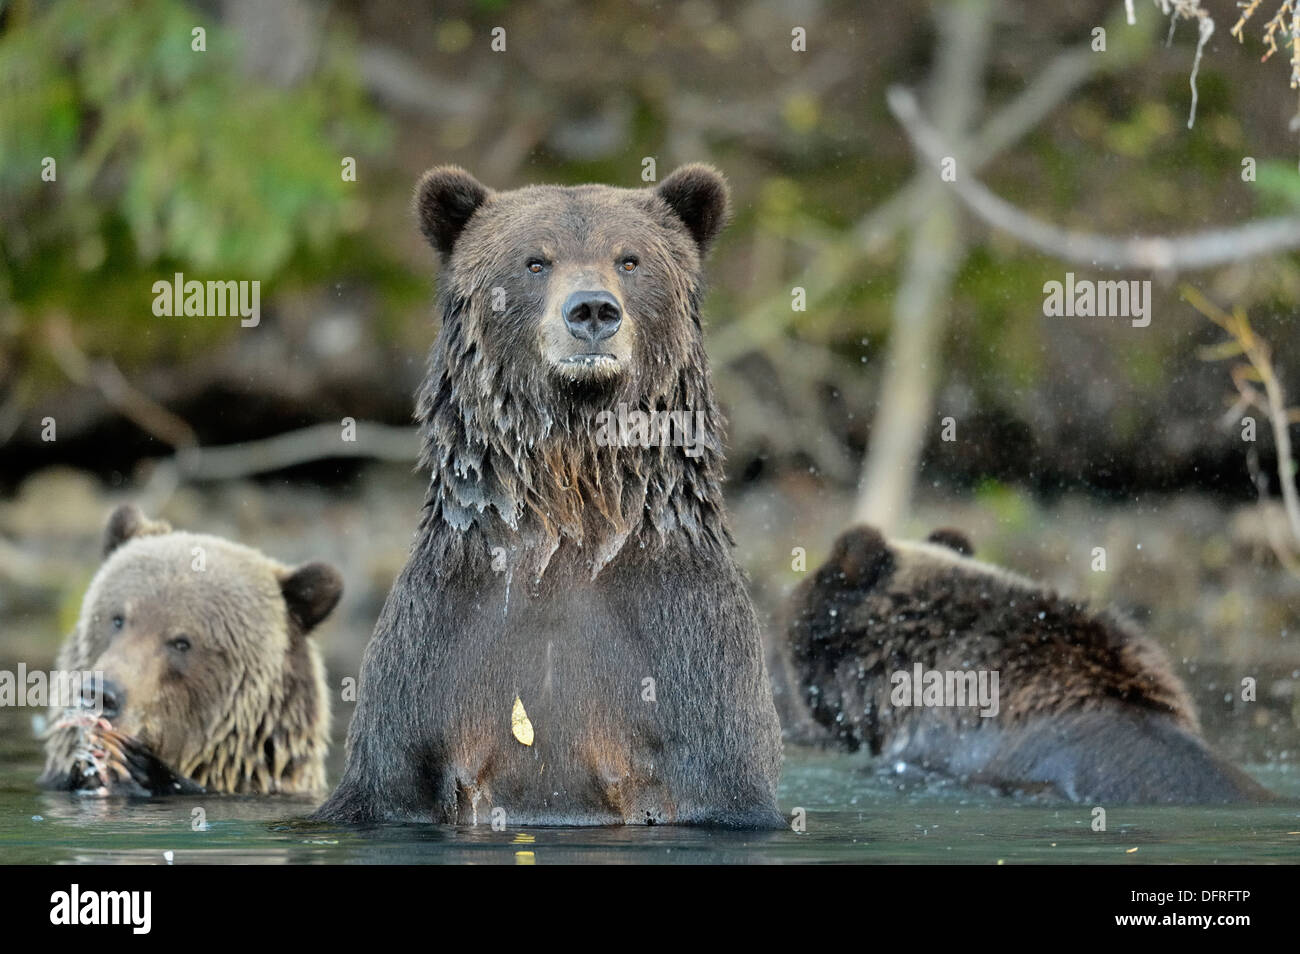 Grizzly bear, Ursus arctos, Hunting sockeye salmon in a salmon river, Chilcotin Wilderness, BC Interior, Canada Stock Photo